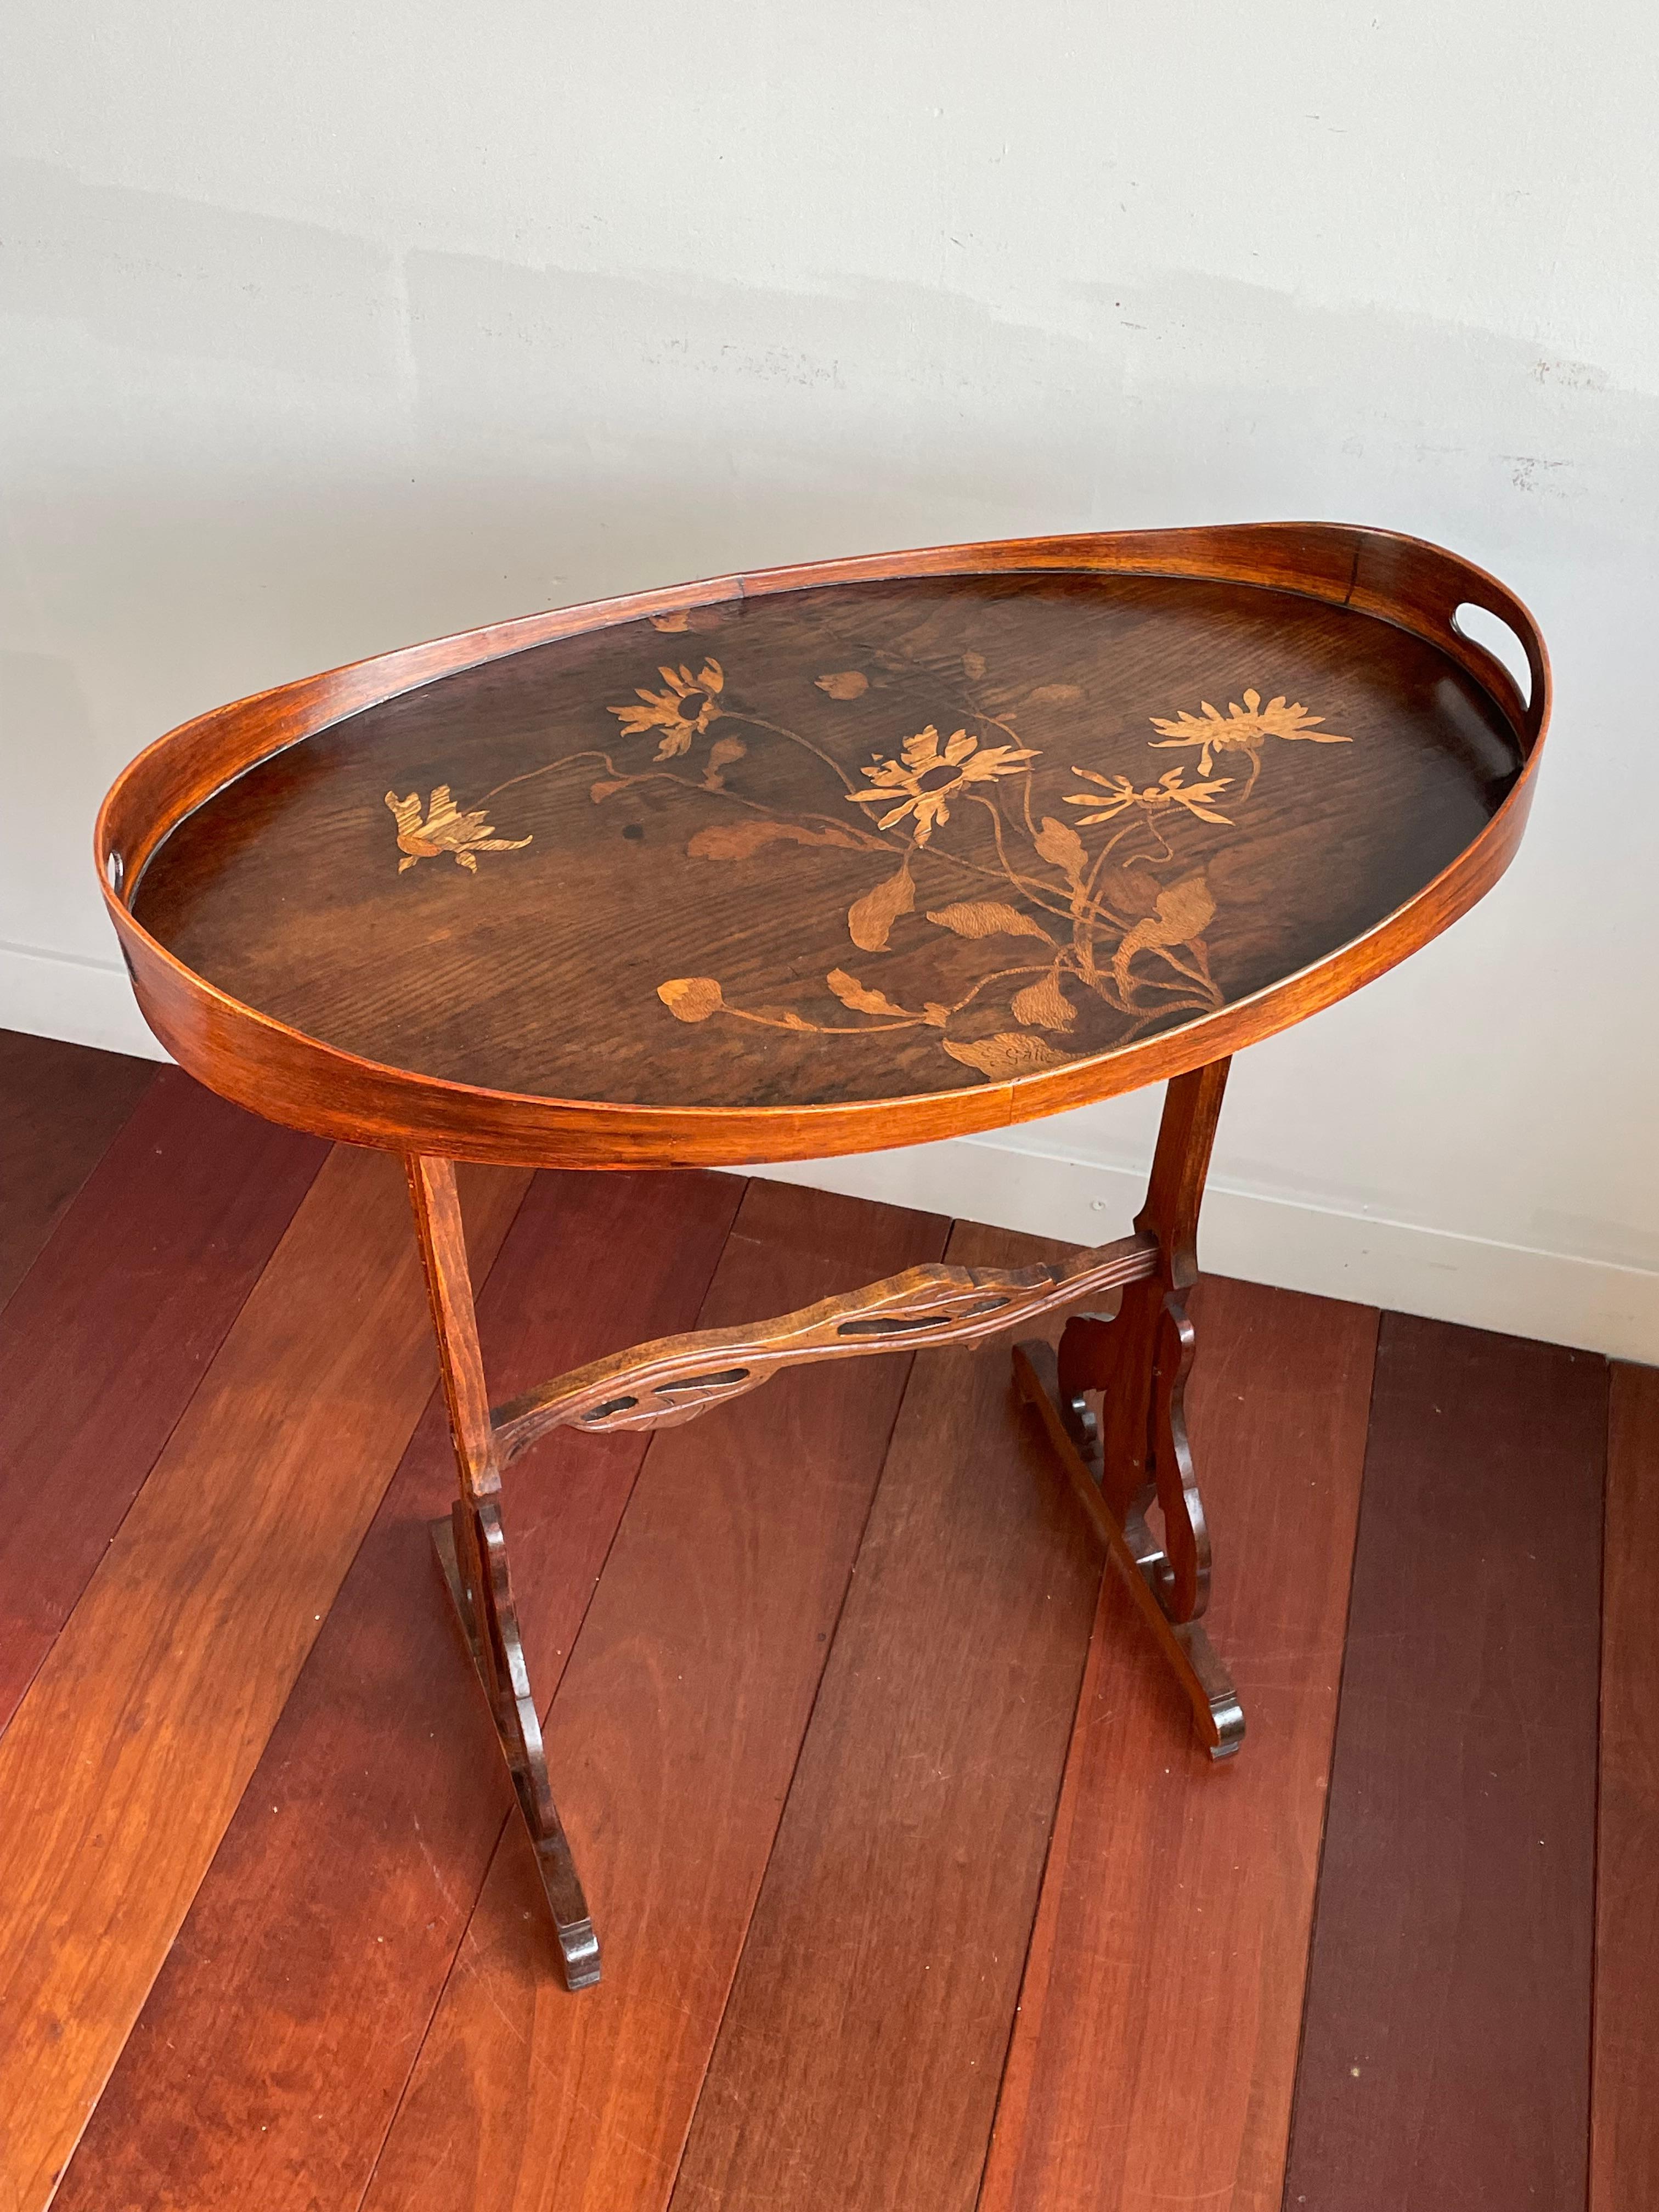 Beautiful and practical Art Nouveau table by one of the French master designers.

This elegant and remarkable condition table in the Art Nouveau style is entirely made of beautiful woods and the inlaid floral patterns most connoisseurs will